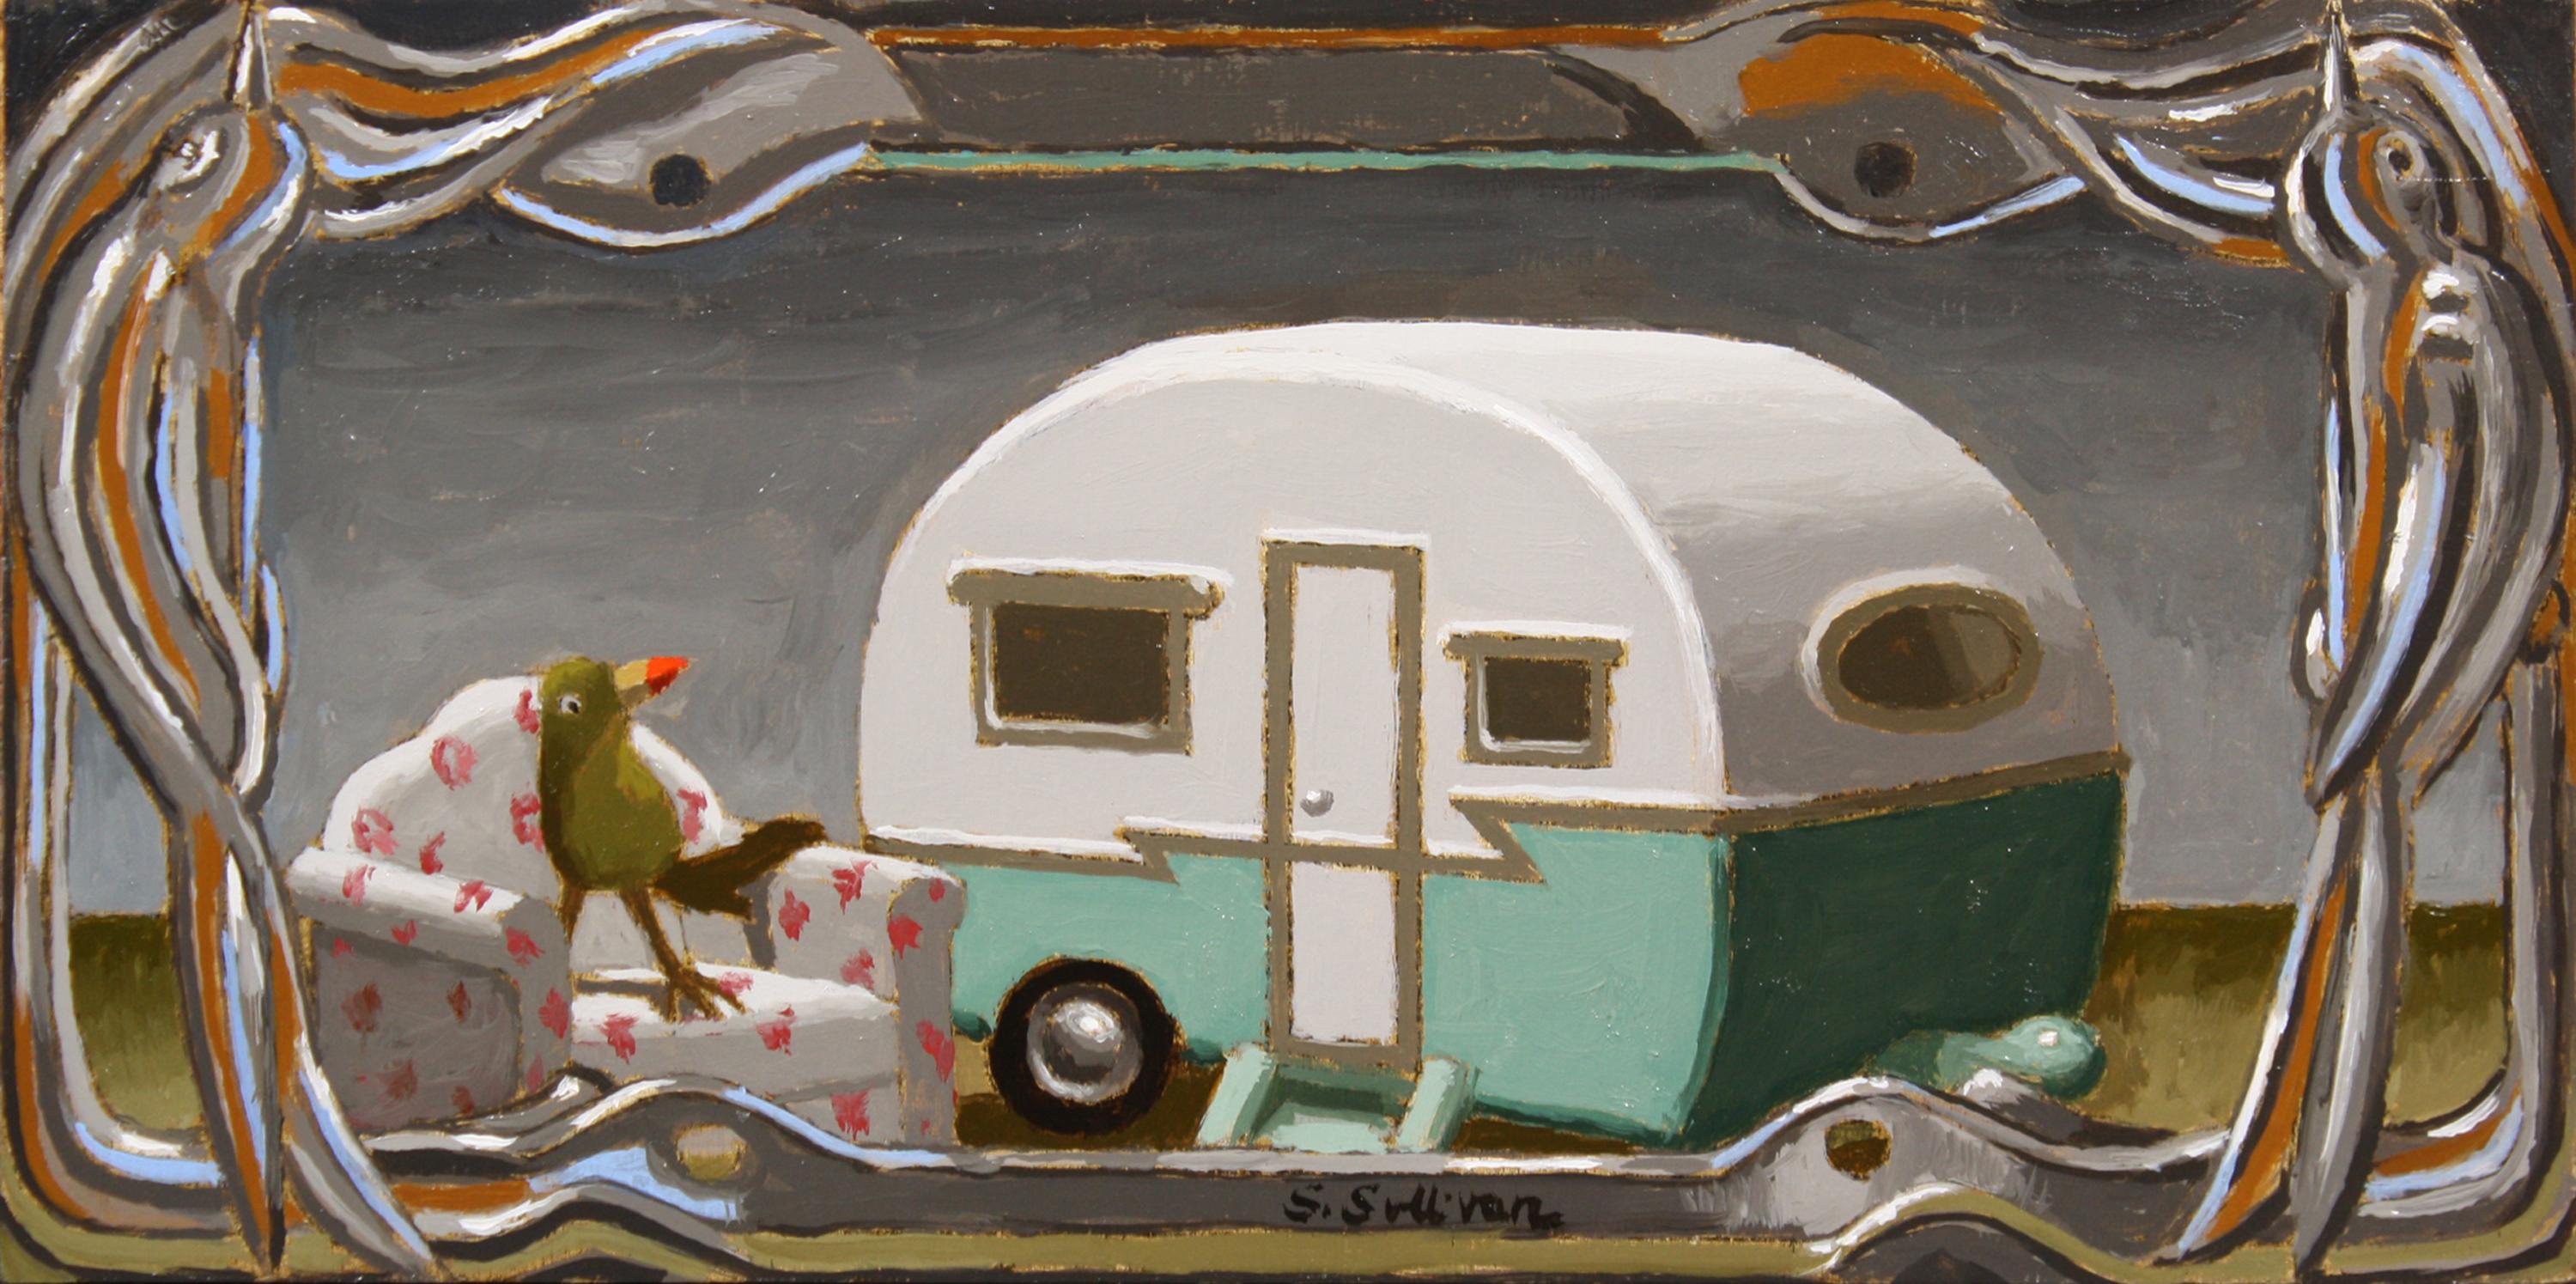 "Glamping" Oil Painting of Toy Camper with a Bird - Art by Shawn Sullivan